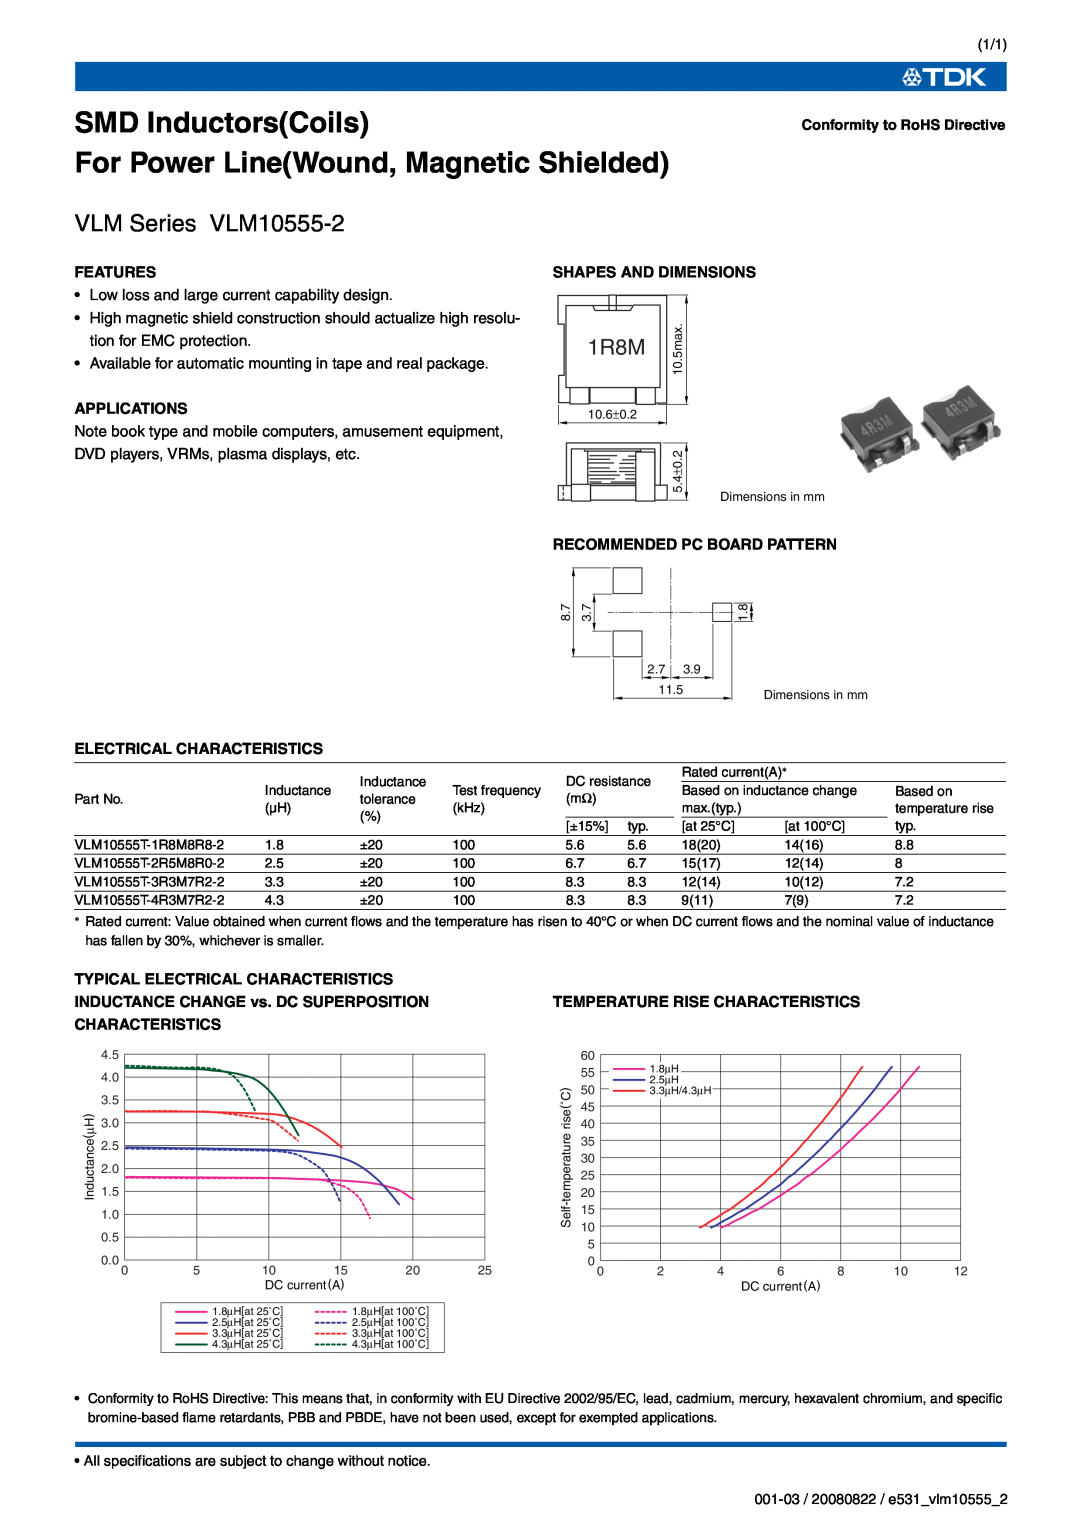 TDK VLM Series VLM10555-2 specifications SMD InductorsCoils For Power LineWound, Magnetic Shielded, 1R8M, Features 